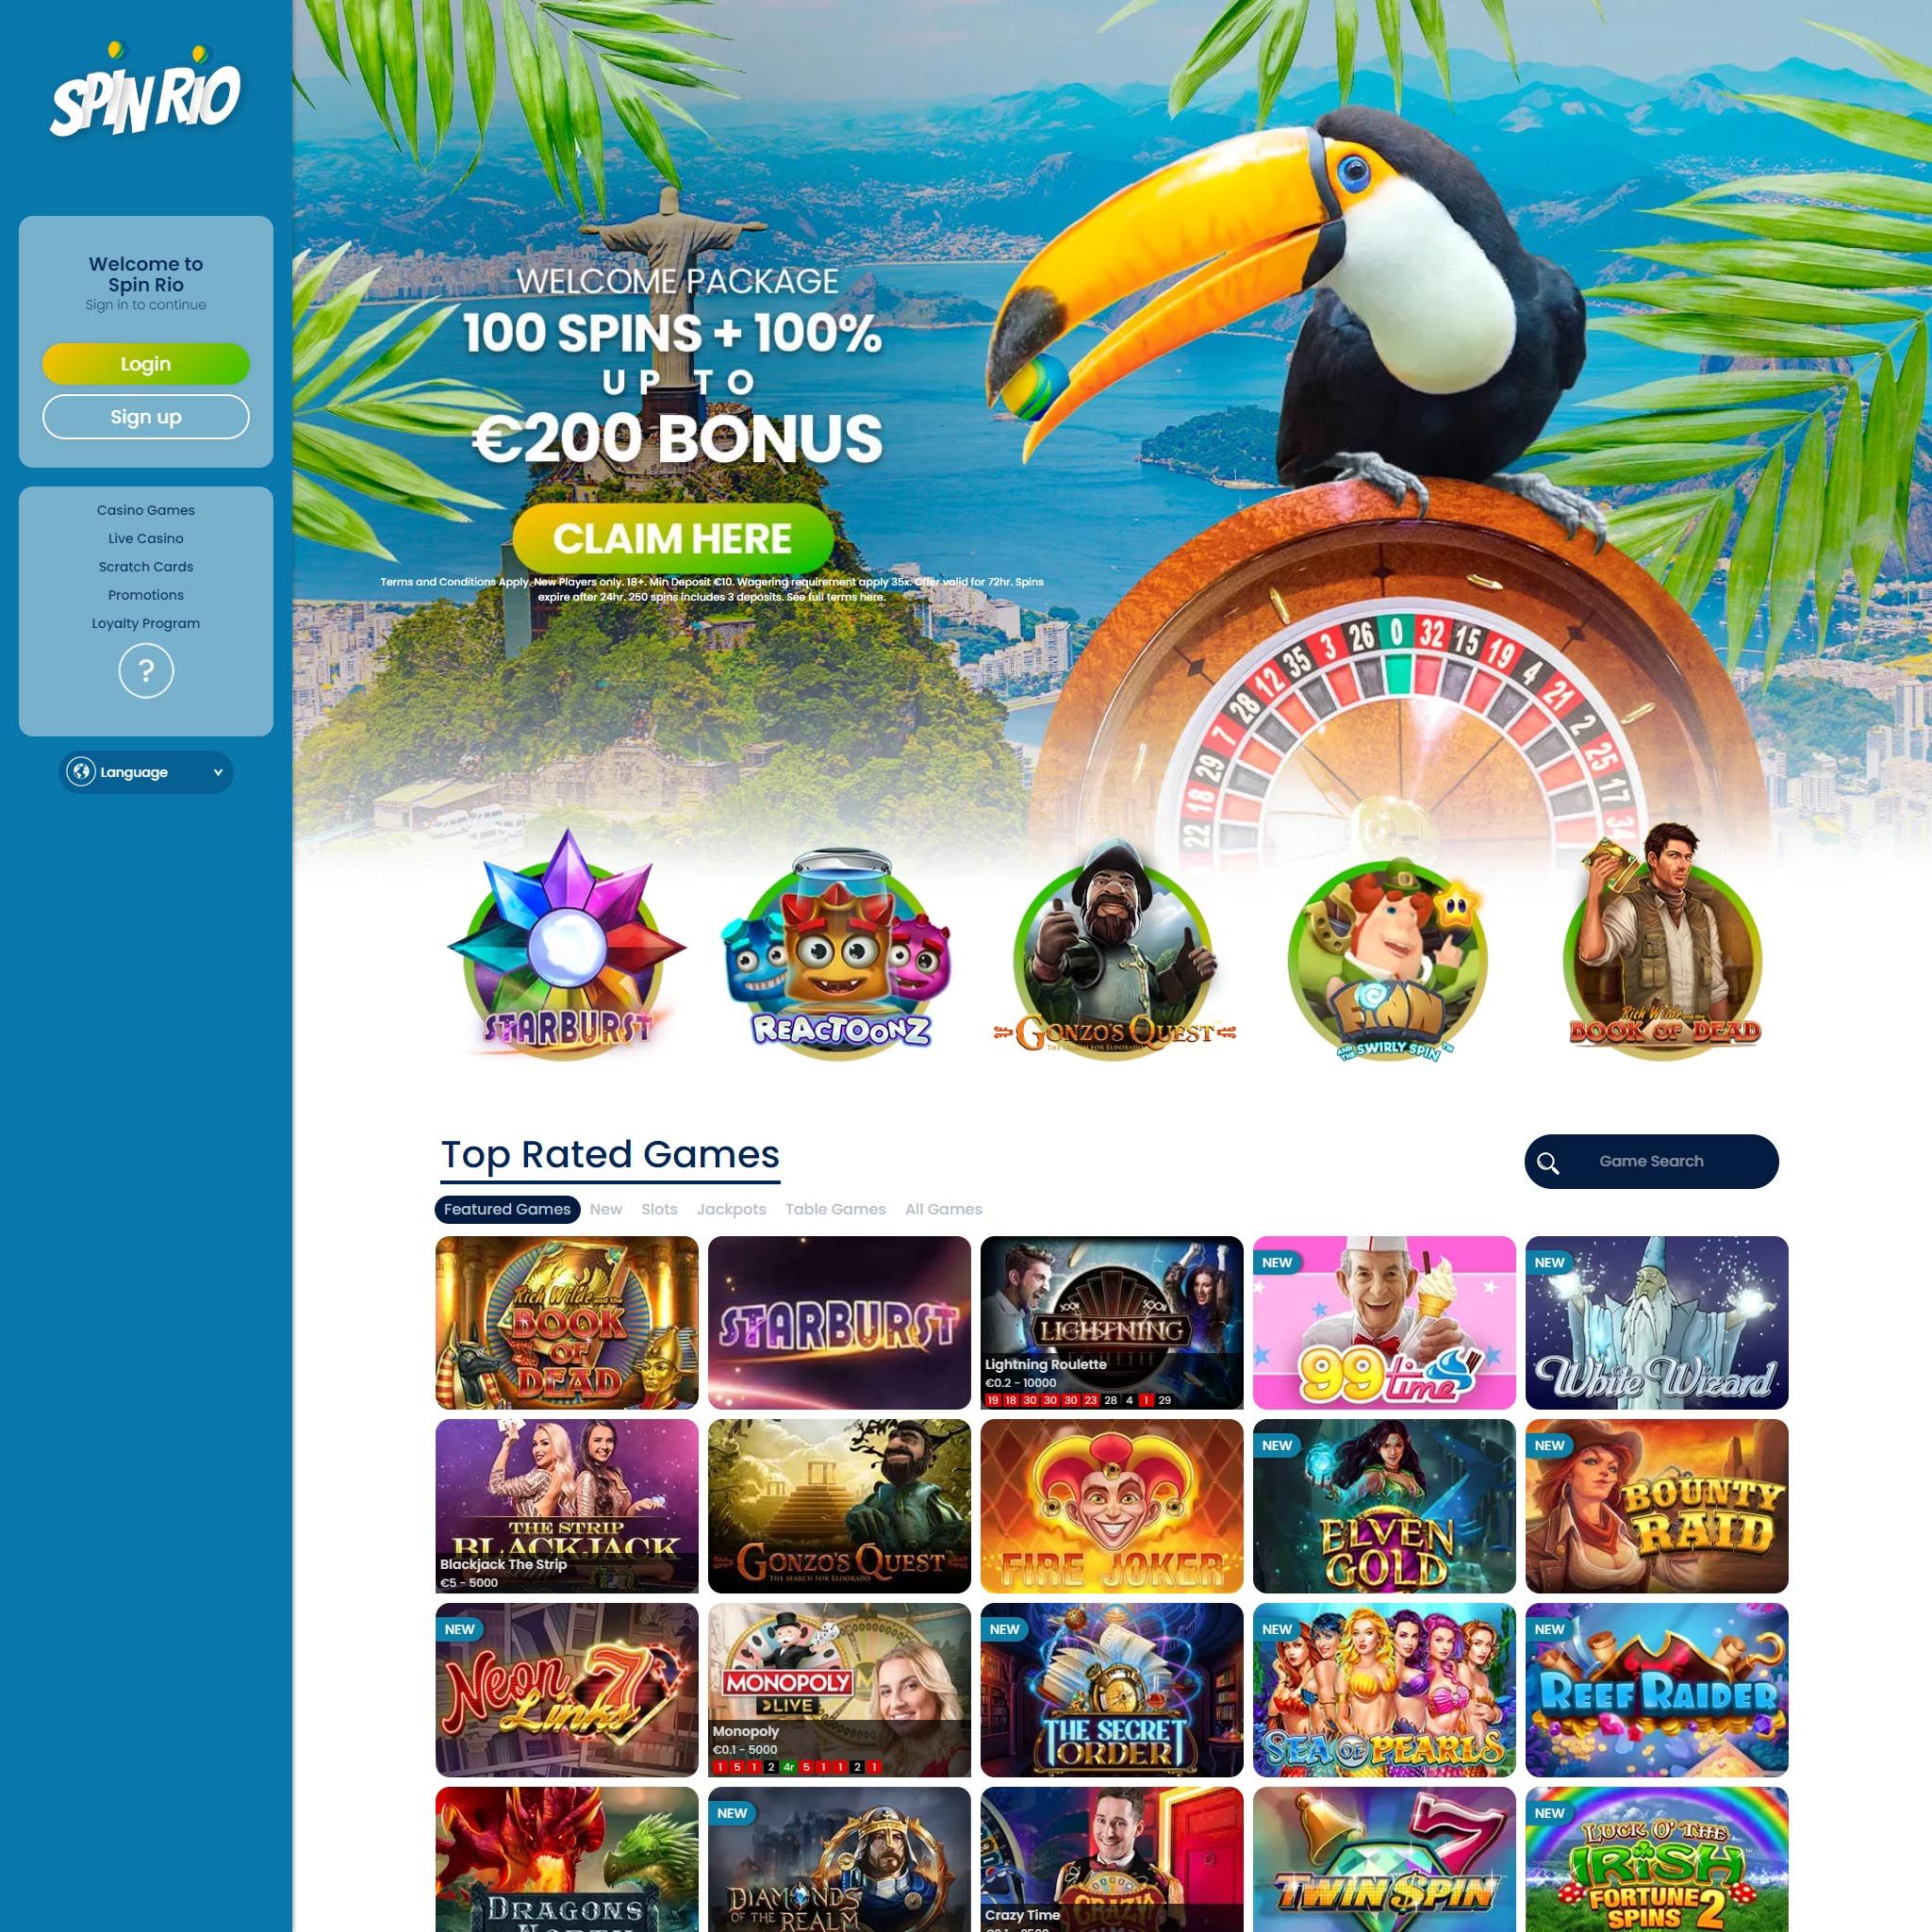 Spin Rio Casino UK review by Mr. Gamble